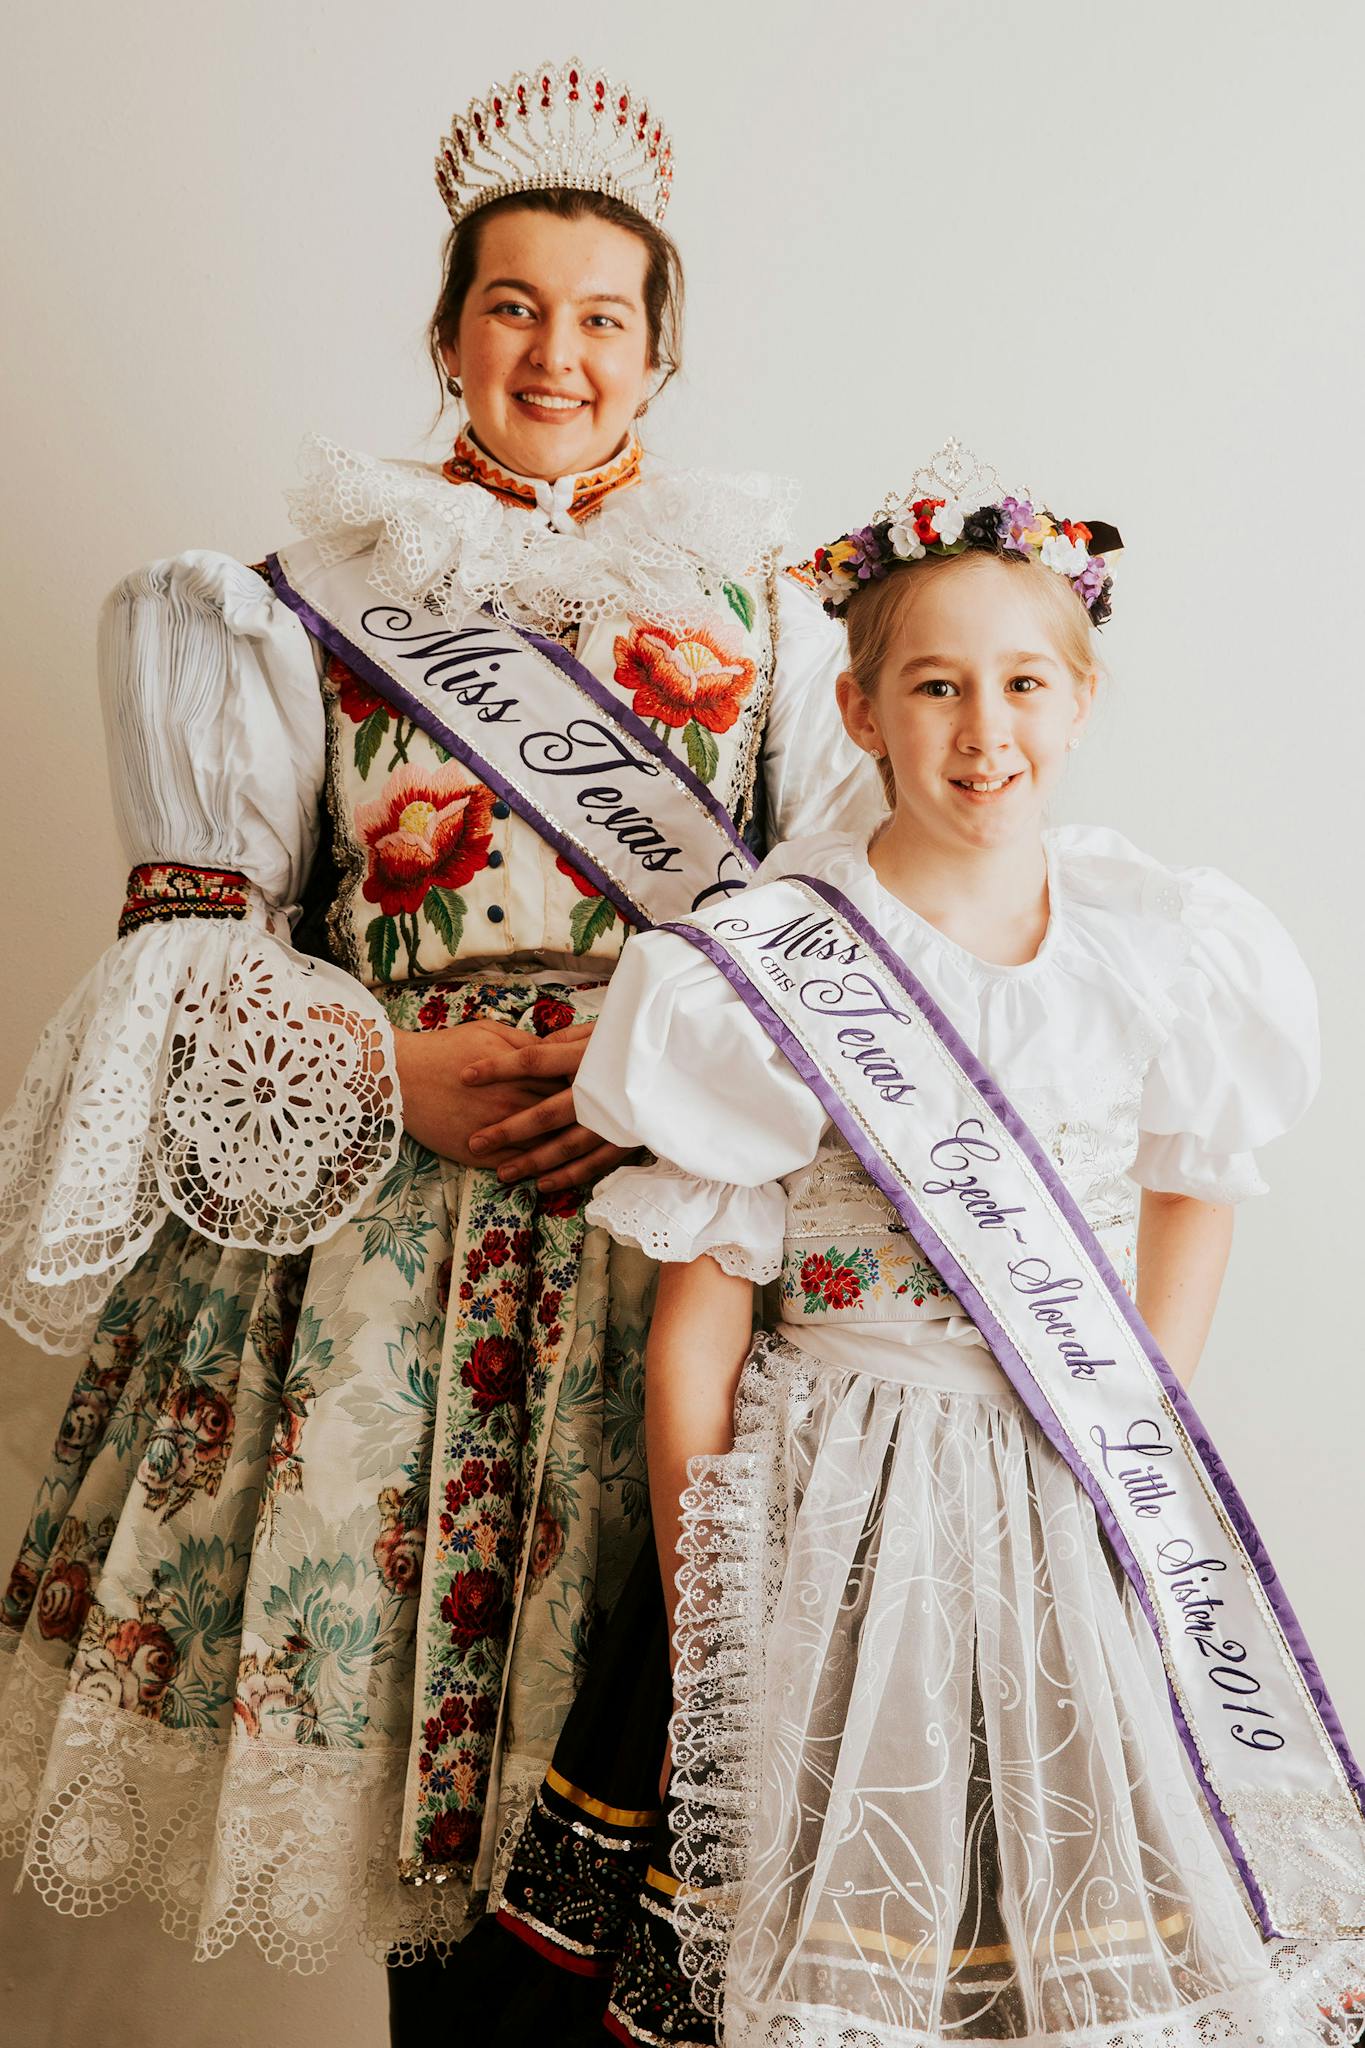 The Traditional Czech Gowns Capable of Withstanding Texas Heat